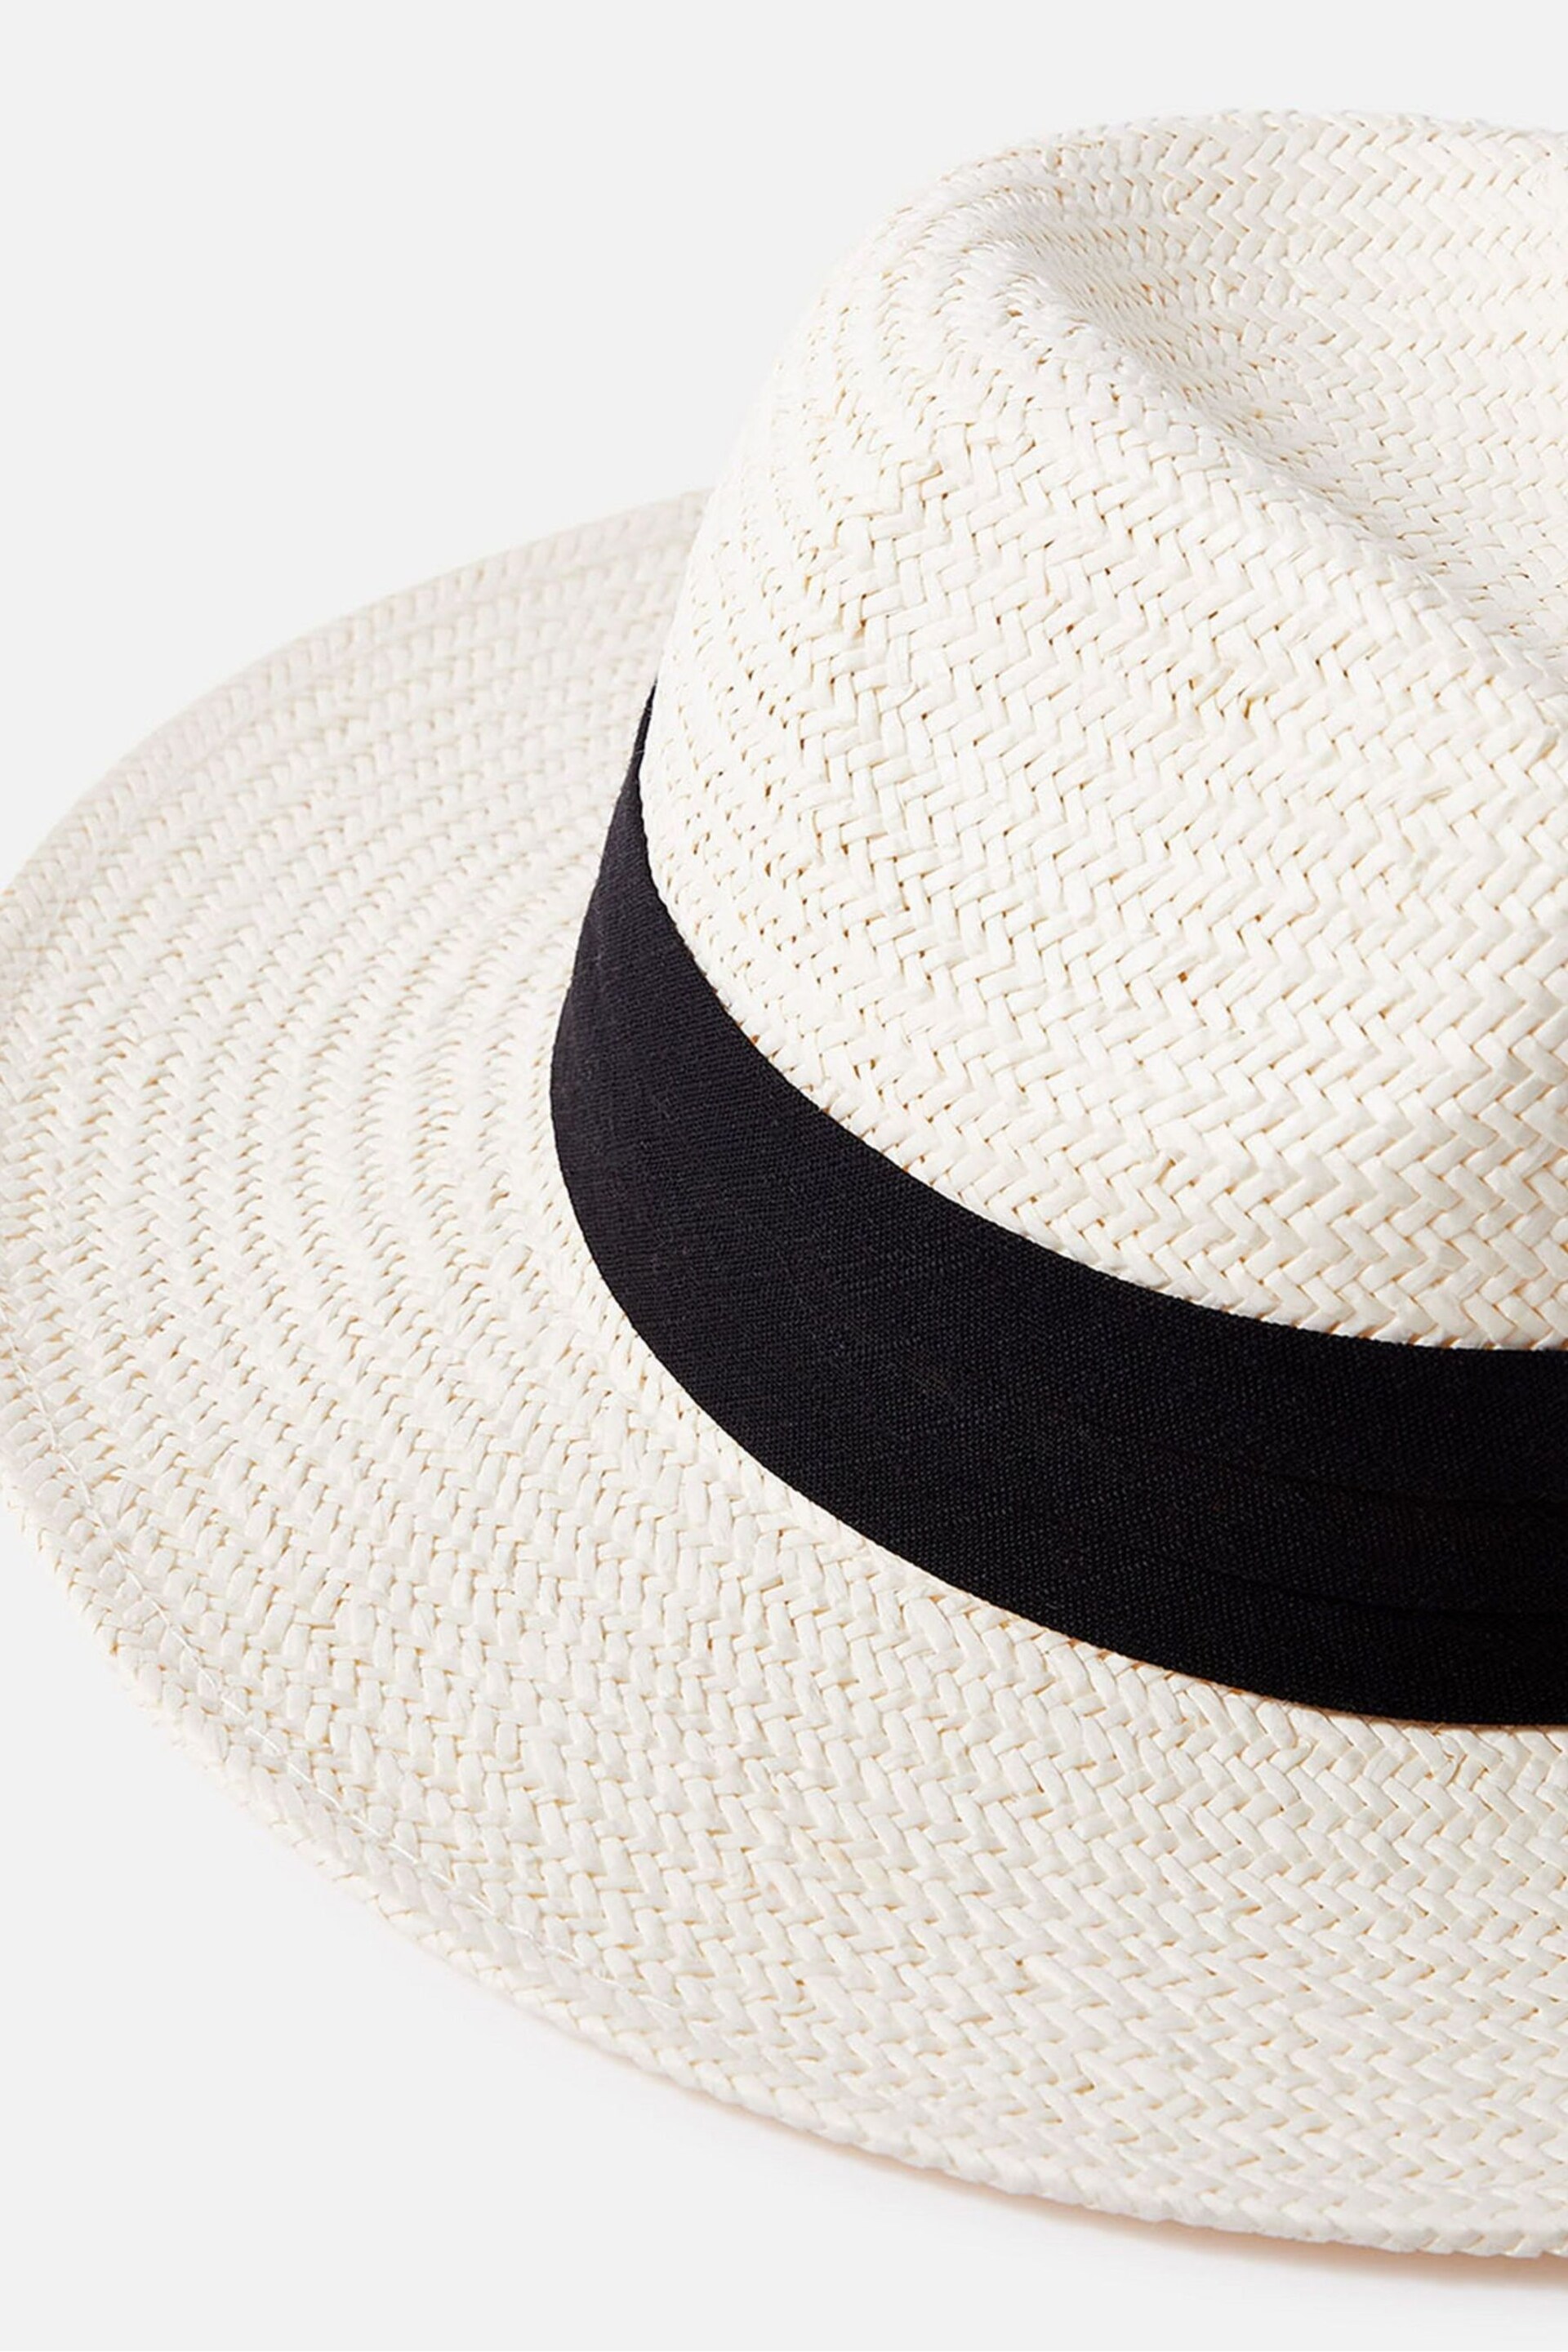 Accessorize White Louise Fedora Hat - Image 3 of 3